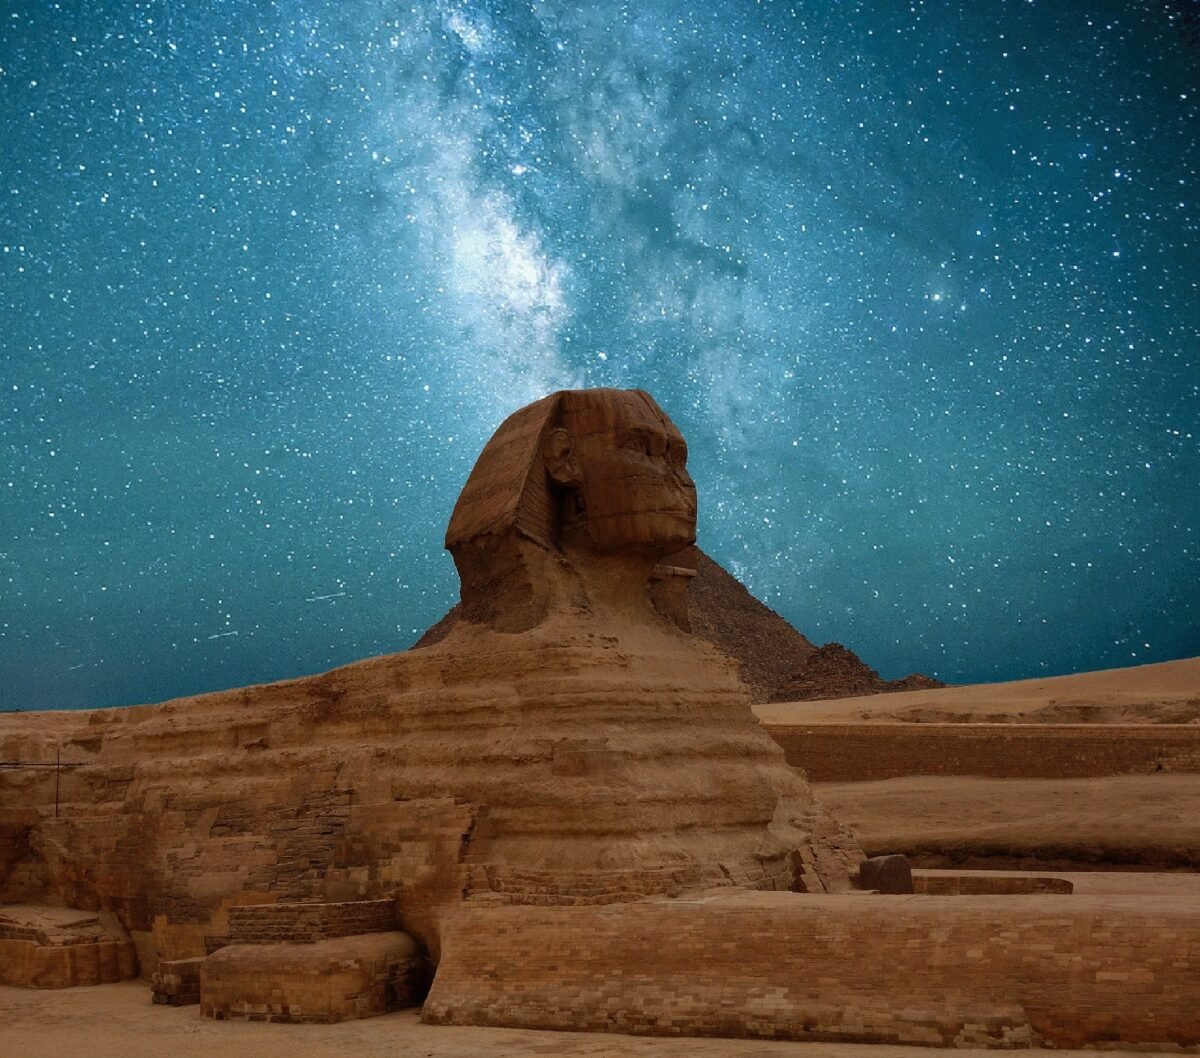 Great Sphinx of Giza, Egypt.